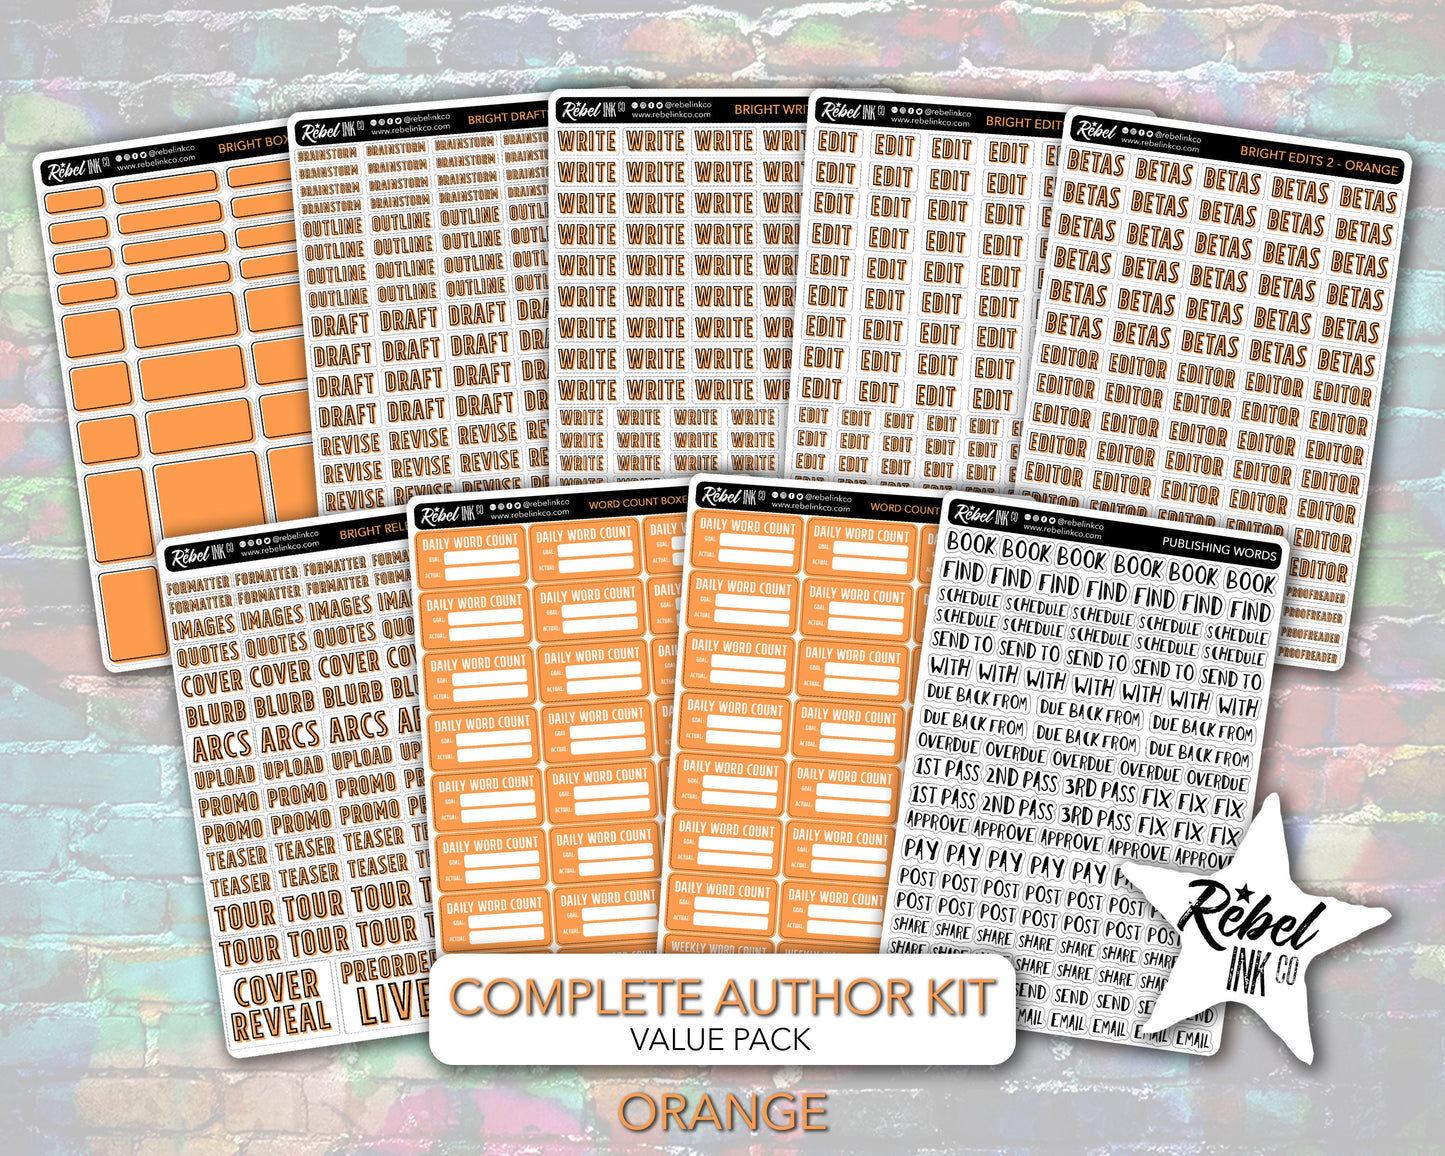 Complete Author Sticker Kit - Bright Options